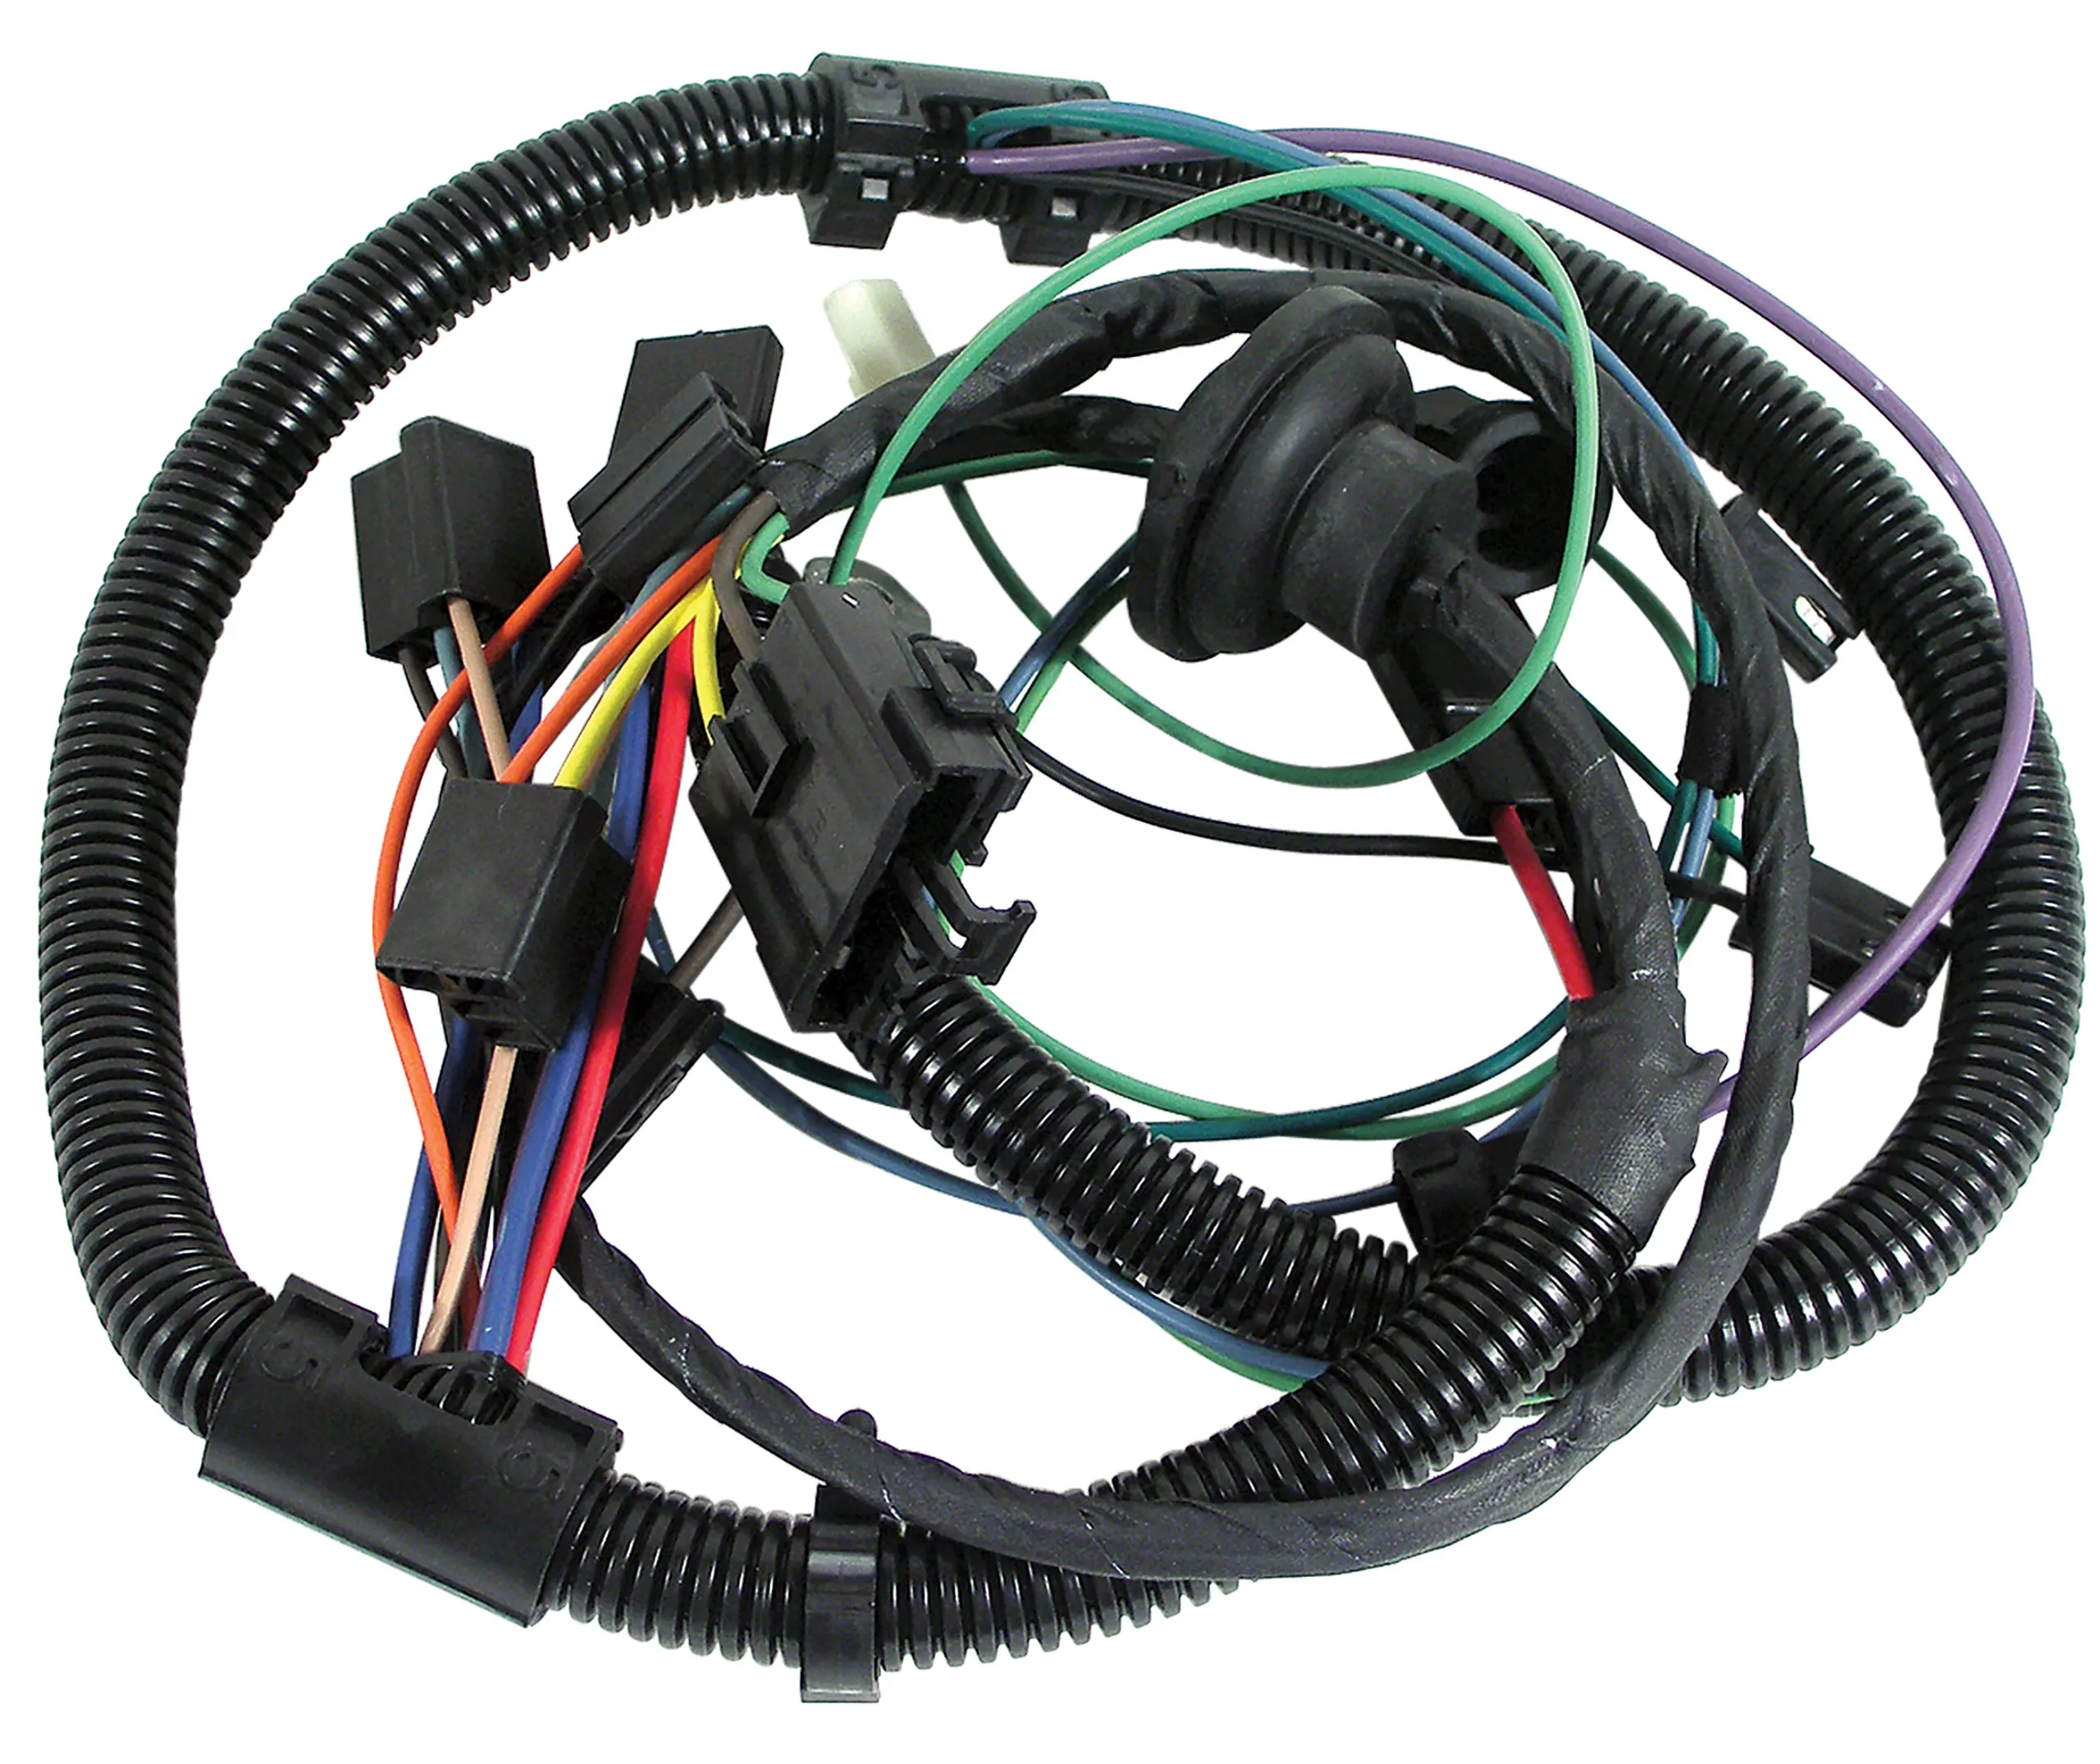 C3 1979 Chevrolet Corvette Harness. Air Conditioning W/Heater Wiring - W/O Auxiliary Fan - Lectric Limited, Inc.